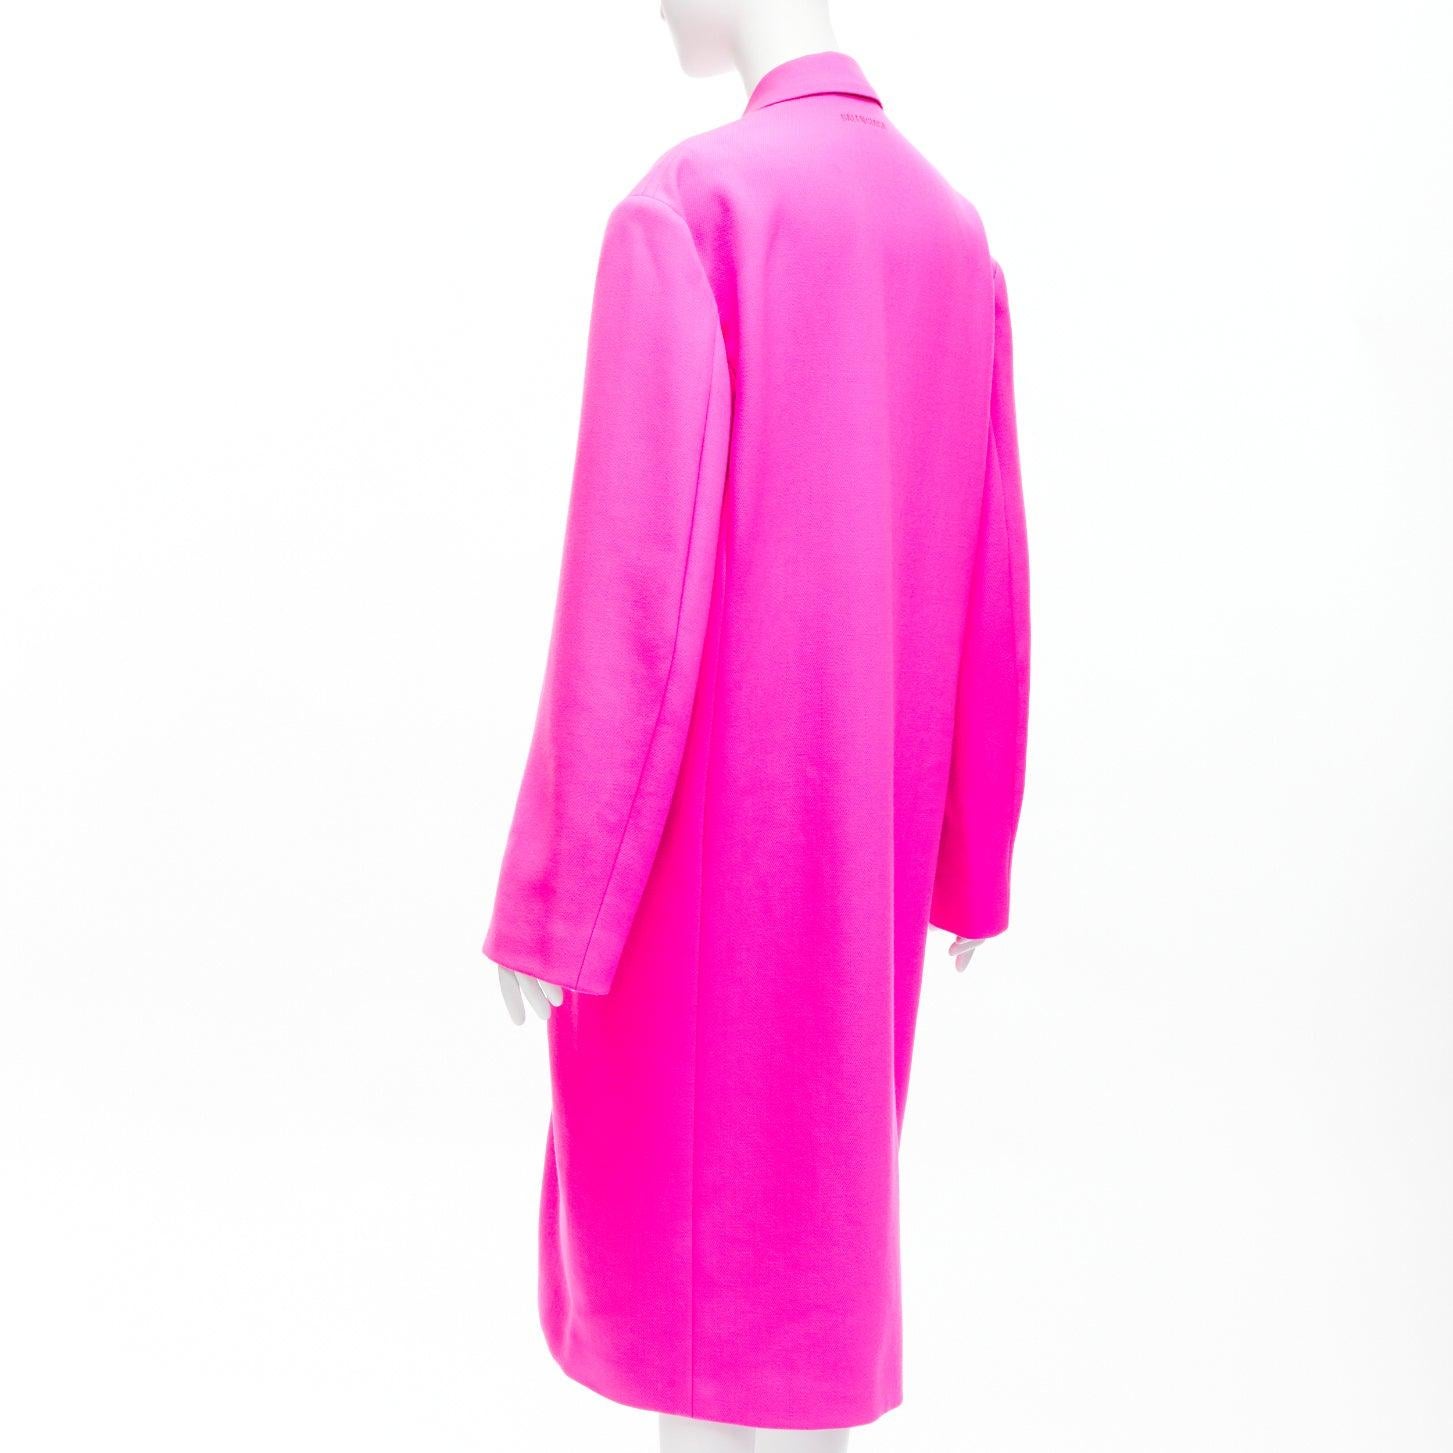 BALENCIAGA hot pink cavalry wool oversized long coat FR34 XS Hailey Beiber For Sale 2